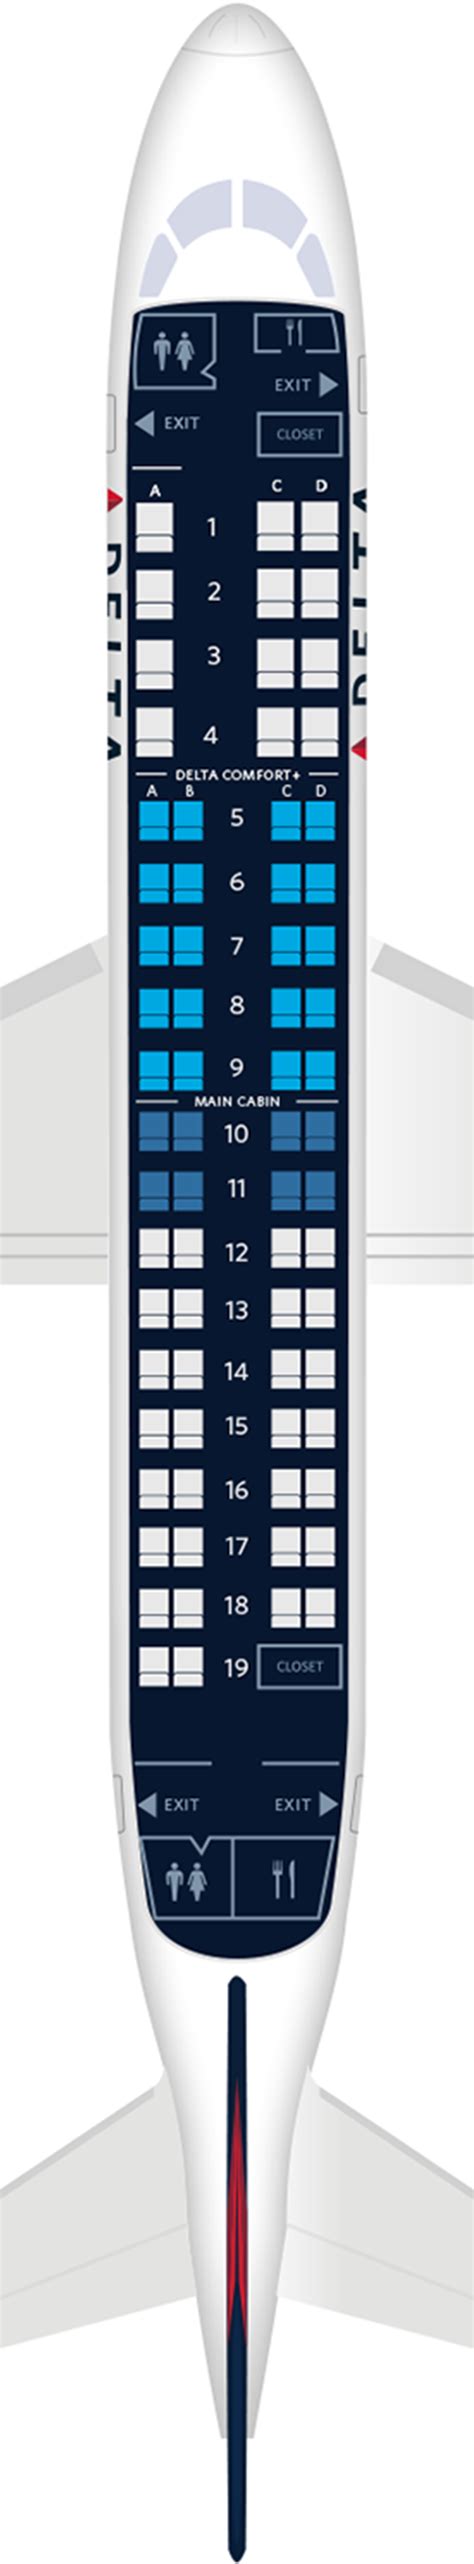 Embraer e175 seating. Seating details. General presentation. There are 15 Embraer 175’s in Air Canada’s fleet (although only 7 are in use). With a length of 31.68 m (103 ft 11 in) and a wingspan of 26.00 m (85 ft 4 in), the Embraer E 175 … 